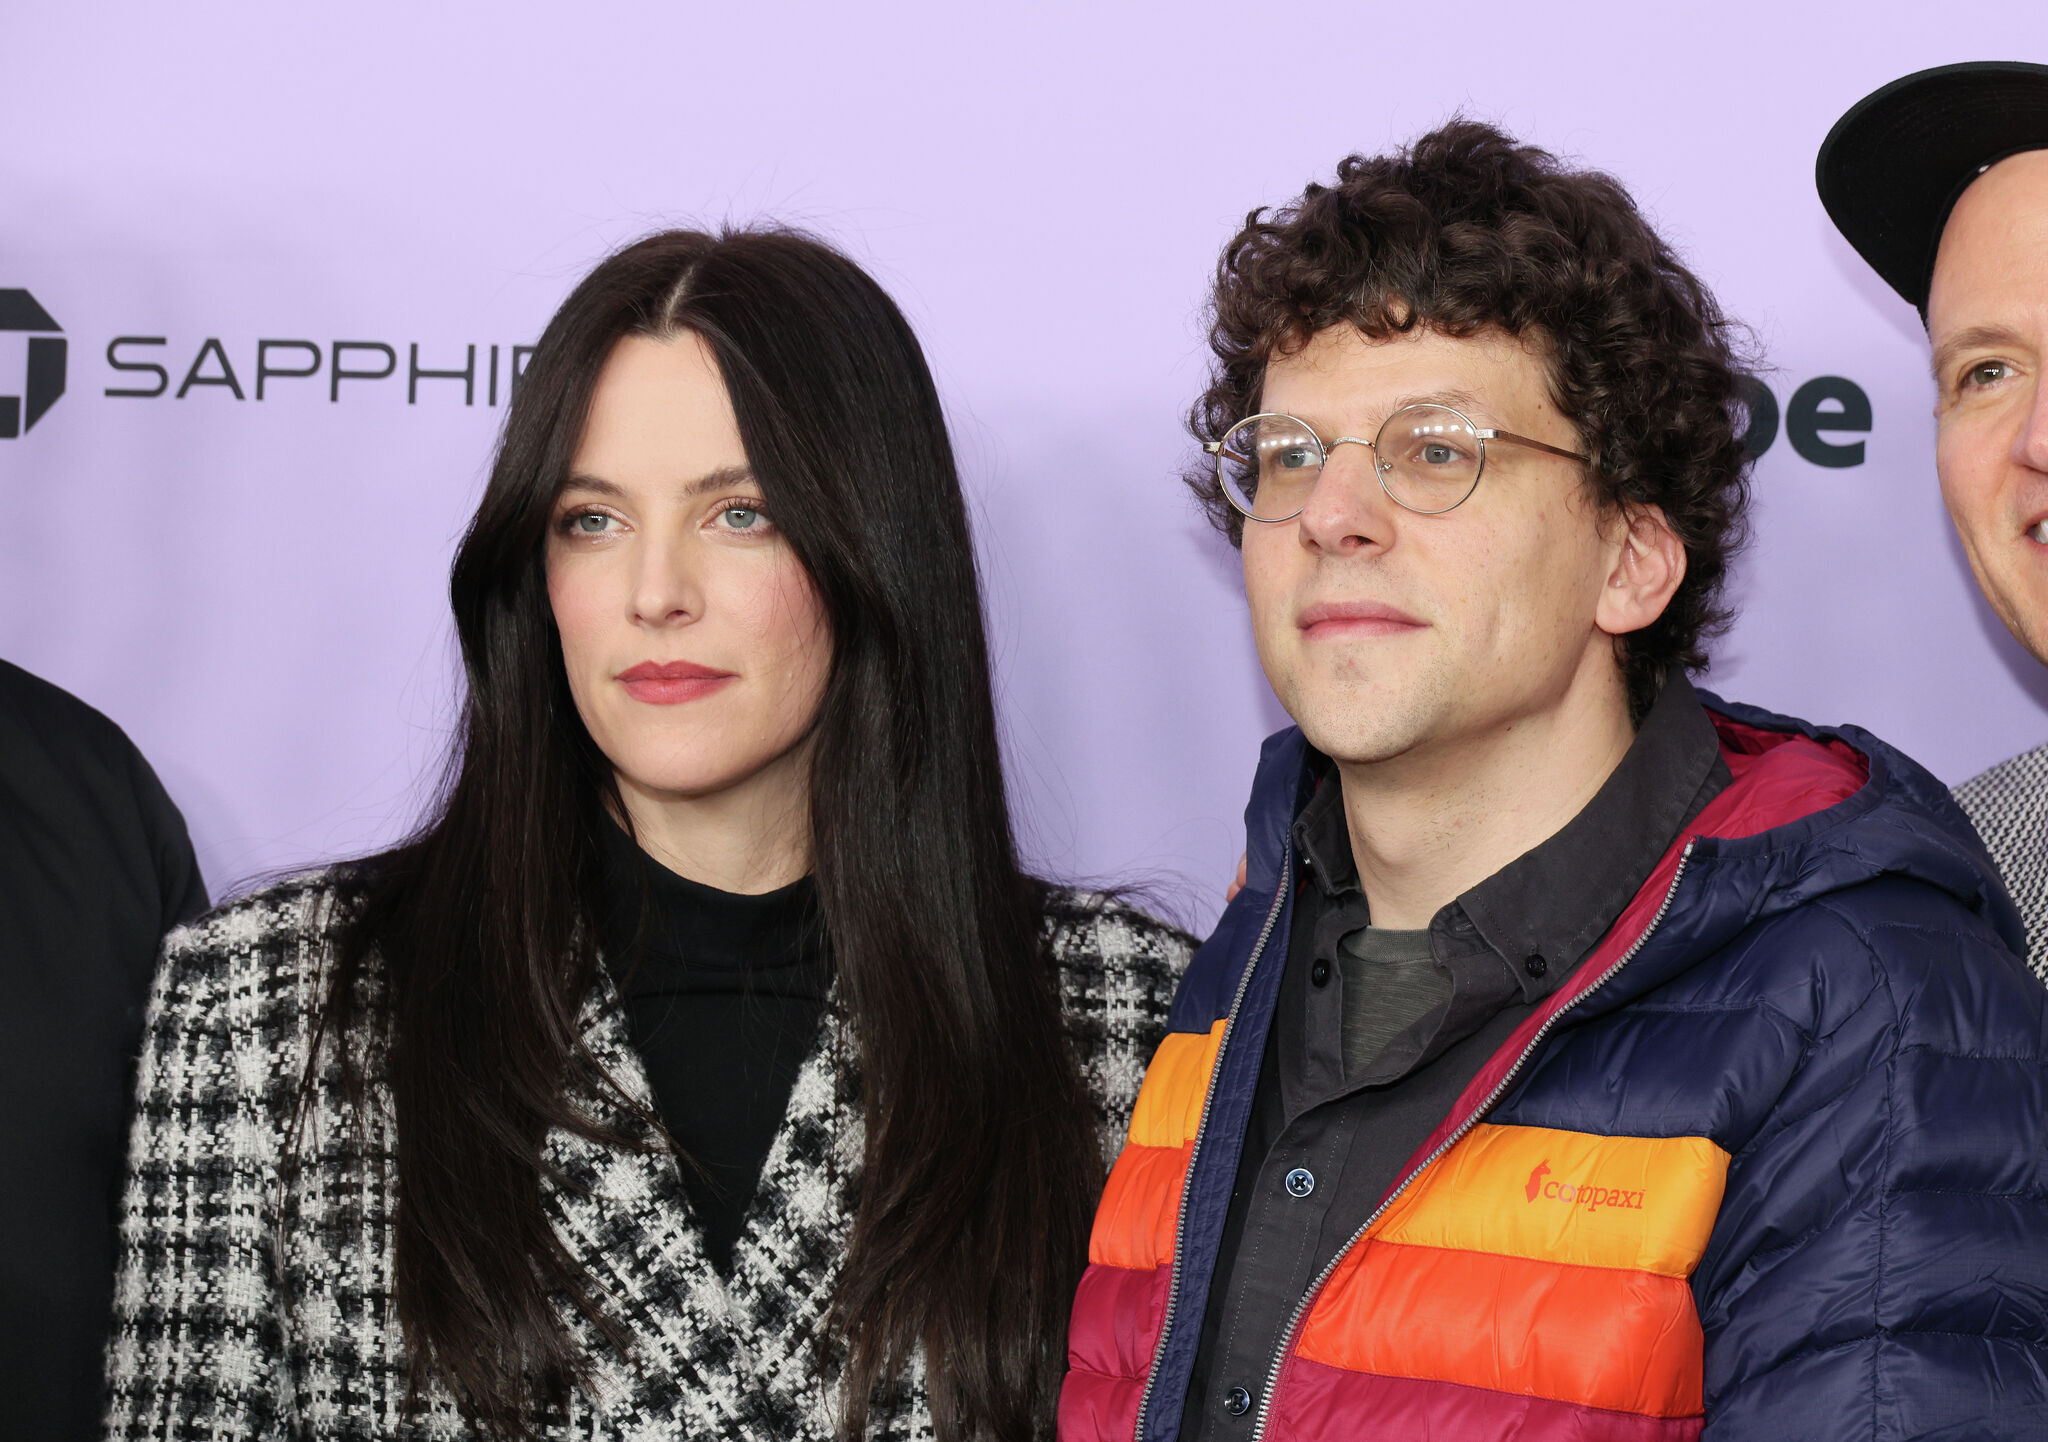 For Sundance film, Jesse Eisenberg and Riley Keough went to 'ape camp'